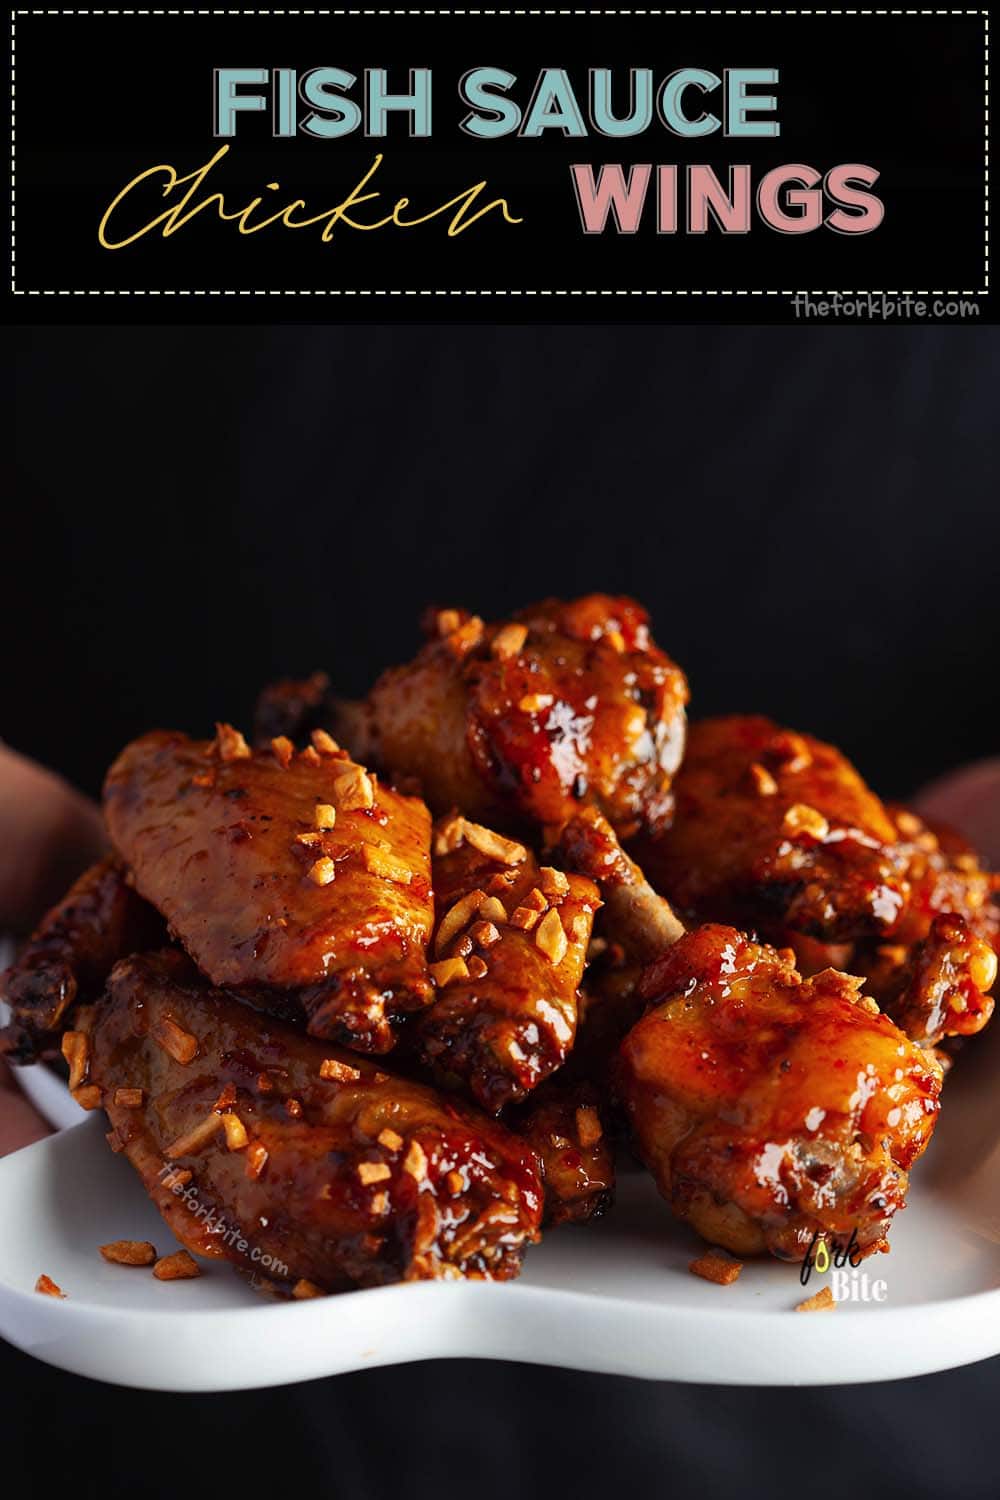 These fish sauce chicken wings are sweet, garlicky, and coated with sticky glaze. The secret ingredient is the Red Boat Fish Sauce that’s packed with umami flavor.